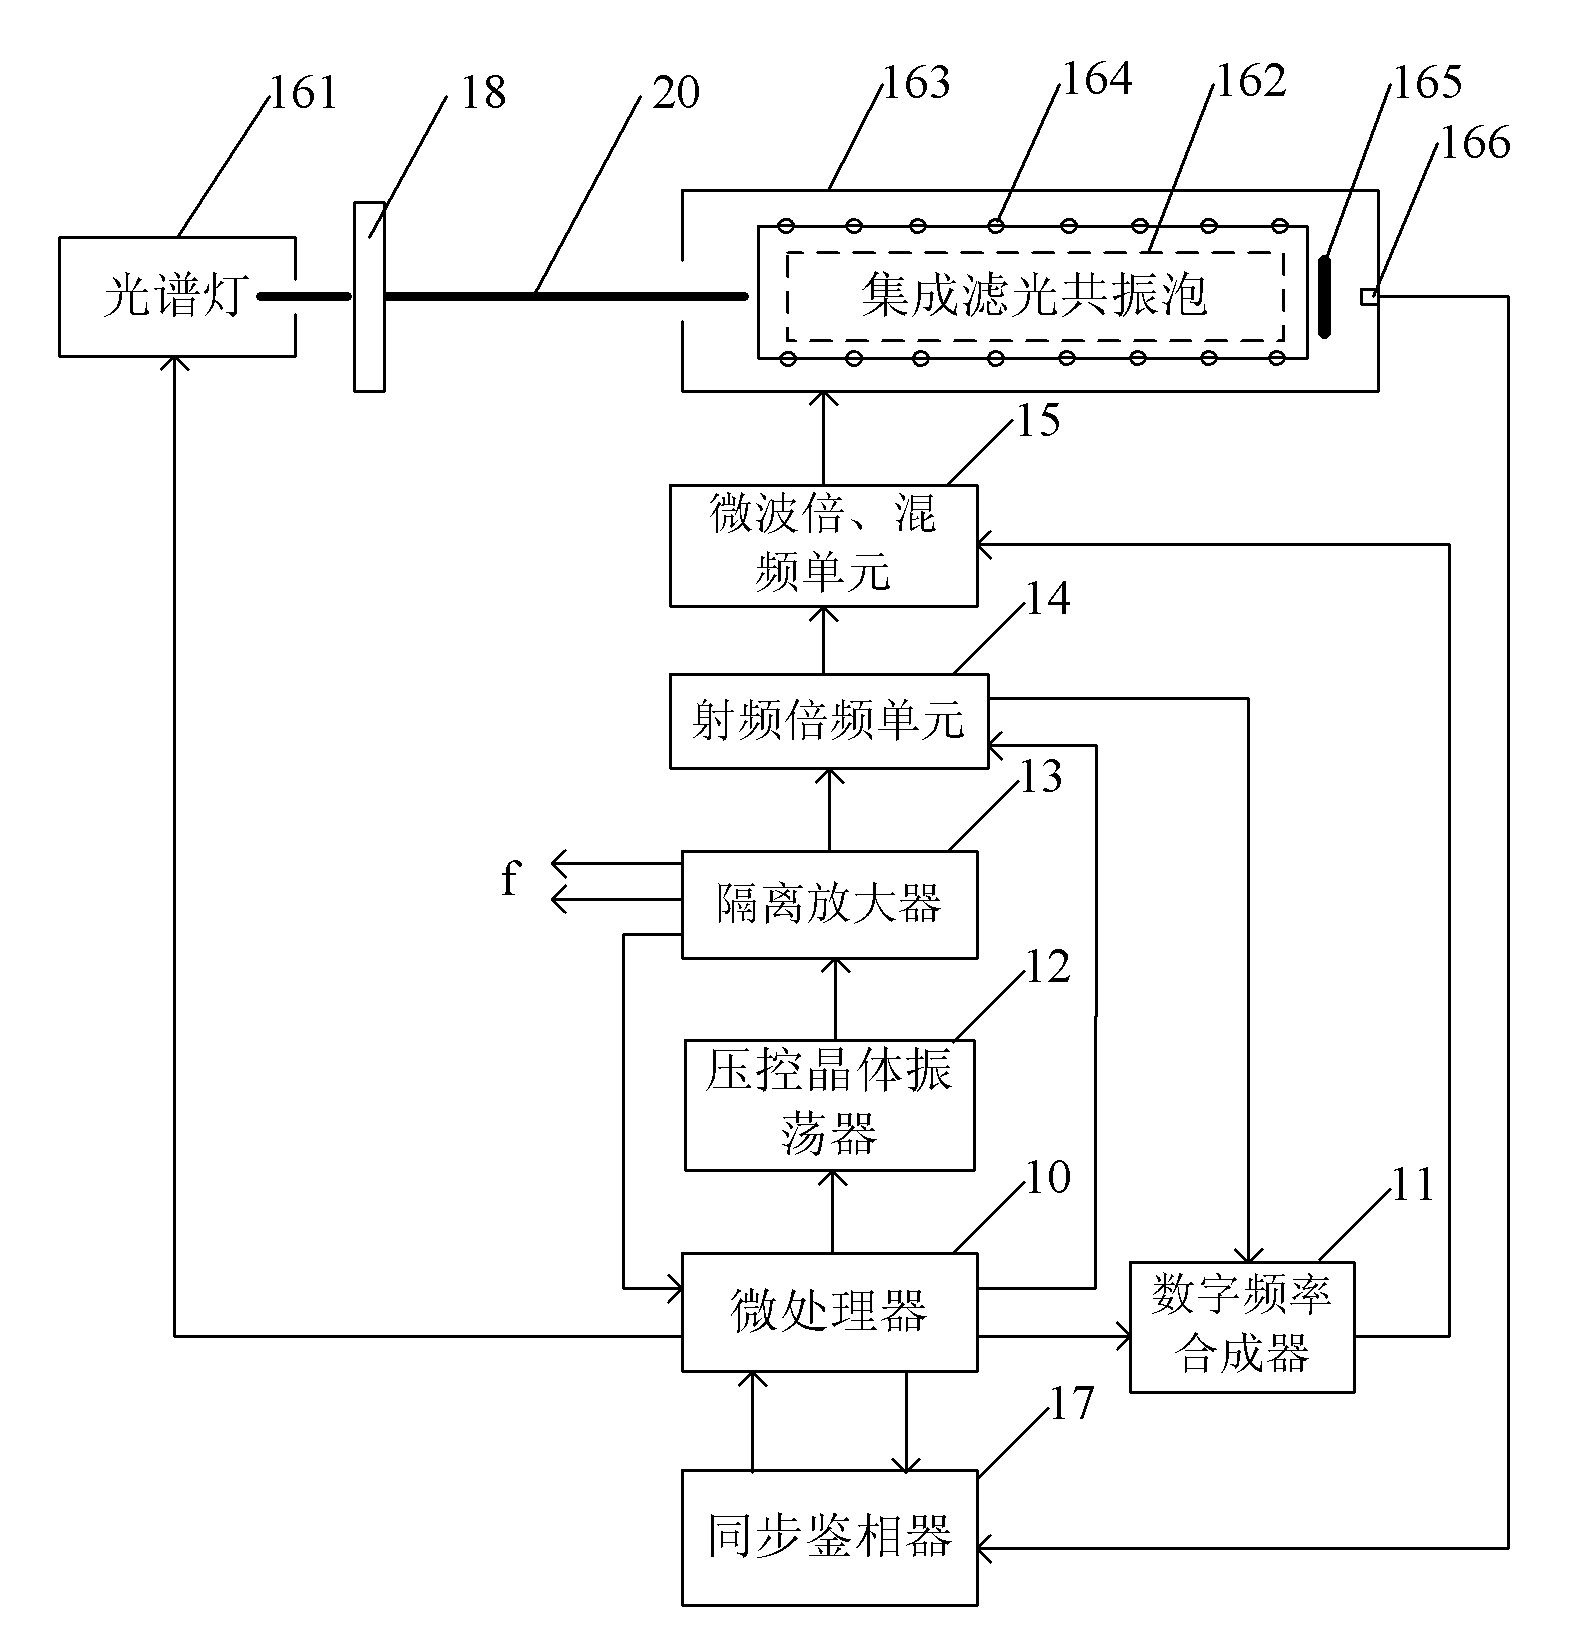 Method for reducing optical frequency shift of rubidium atomic frequency standard